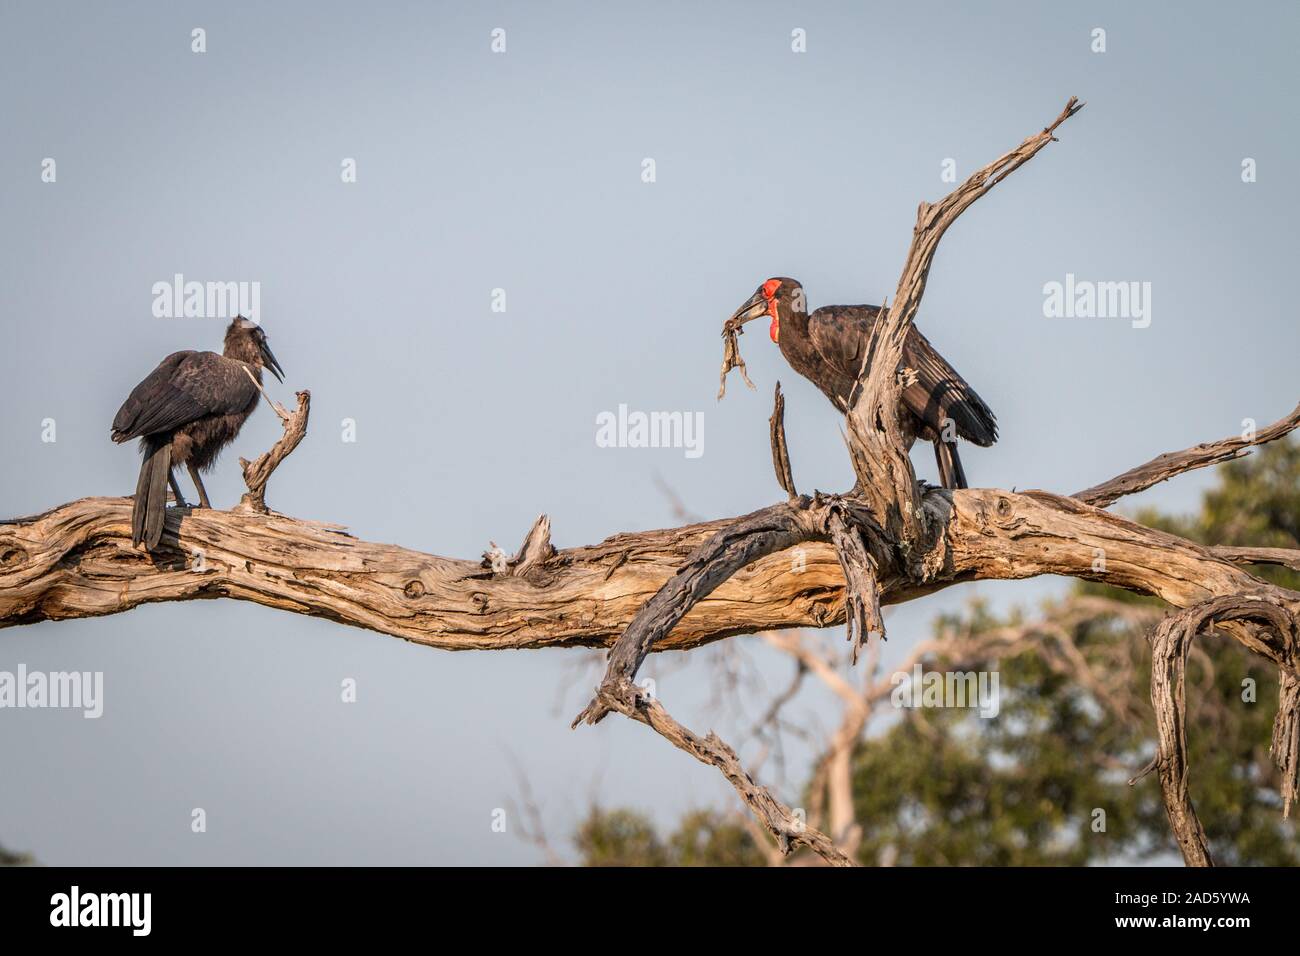 Two Southern ground hornbills on the branch. Stock Photo